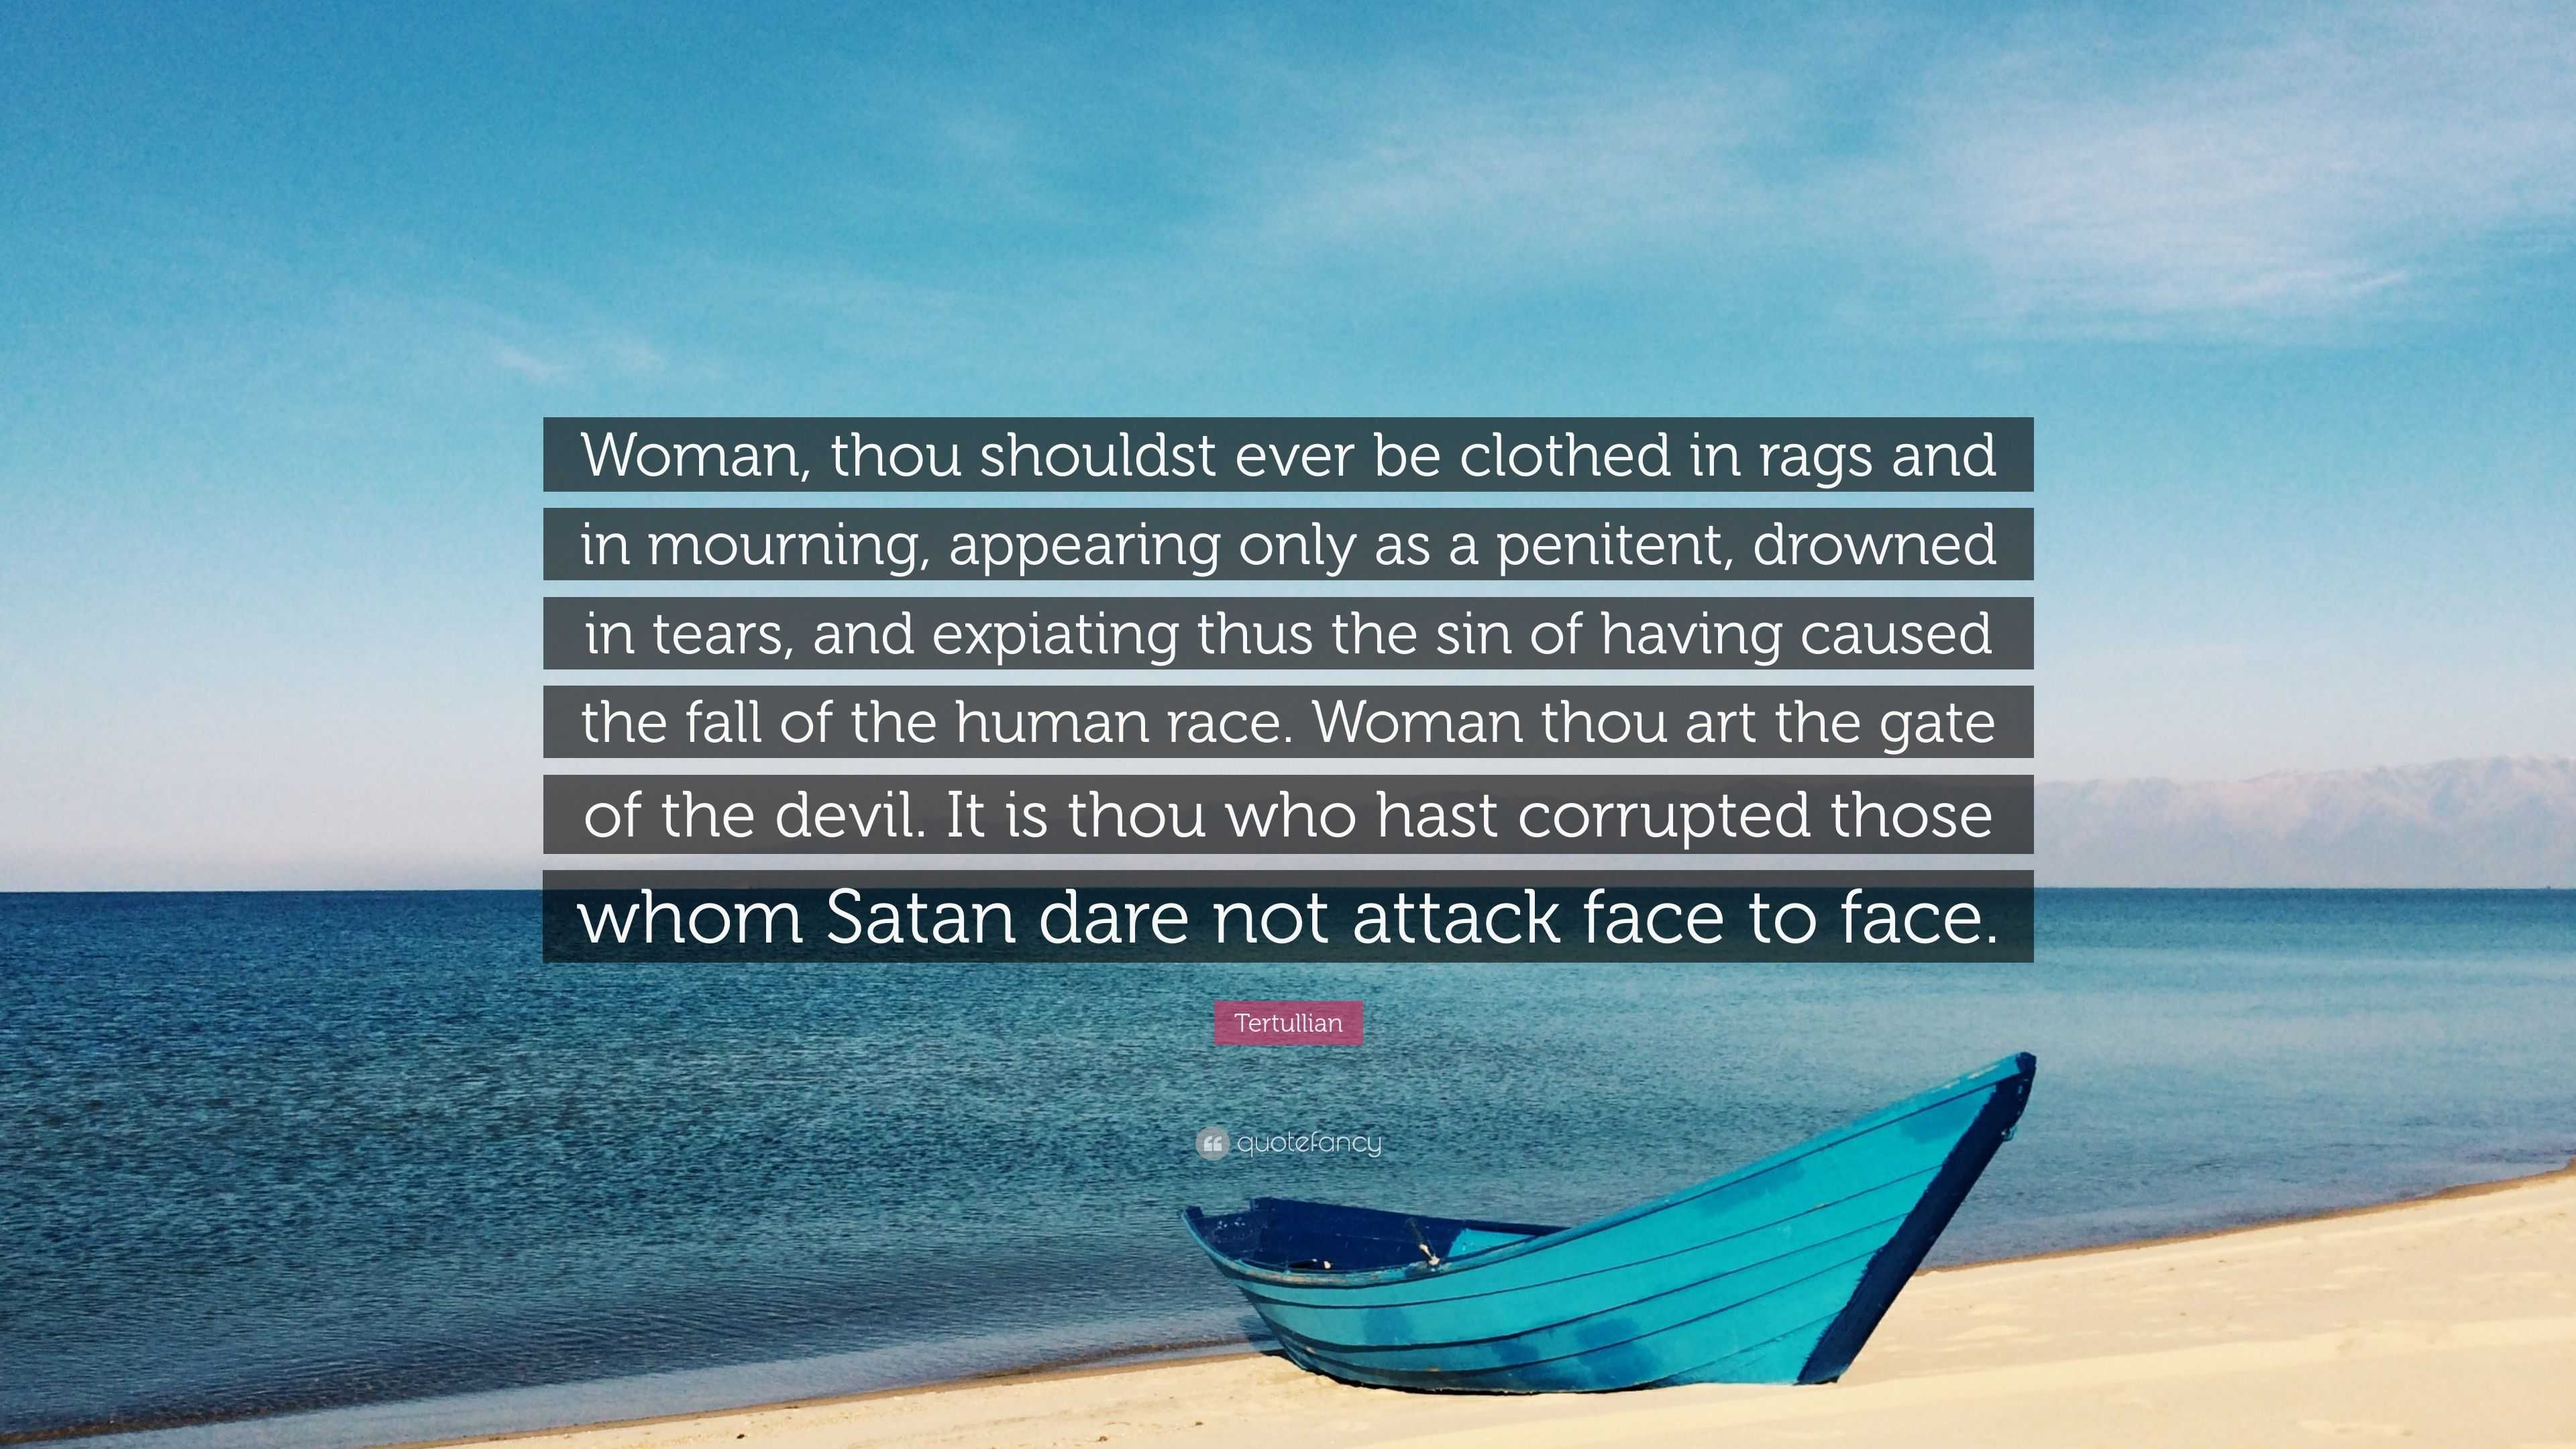 Tertullian Quote: “Woman, thou shouldst ever be clothed in rags and in